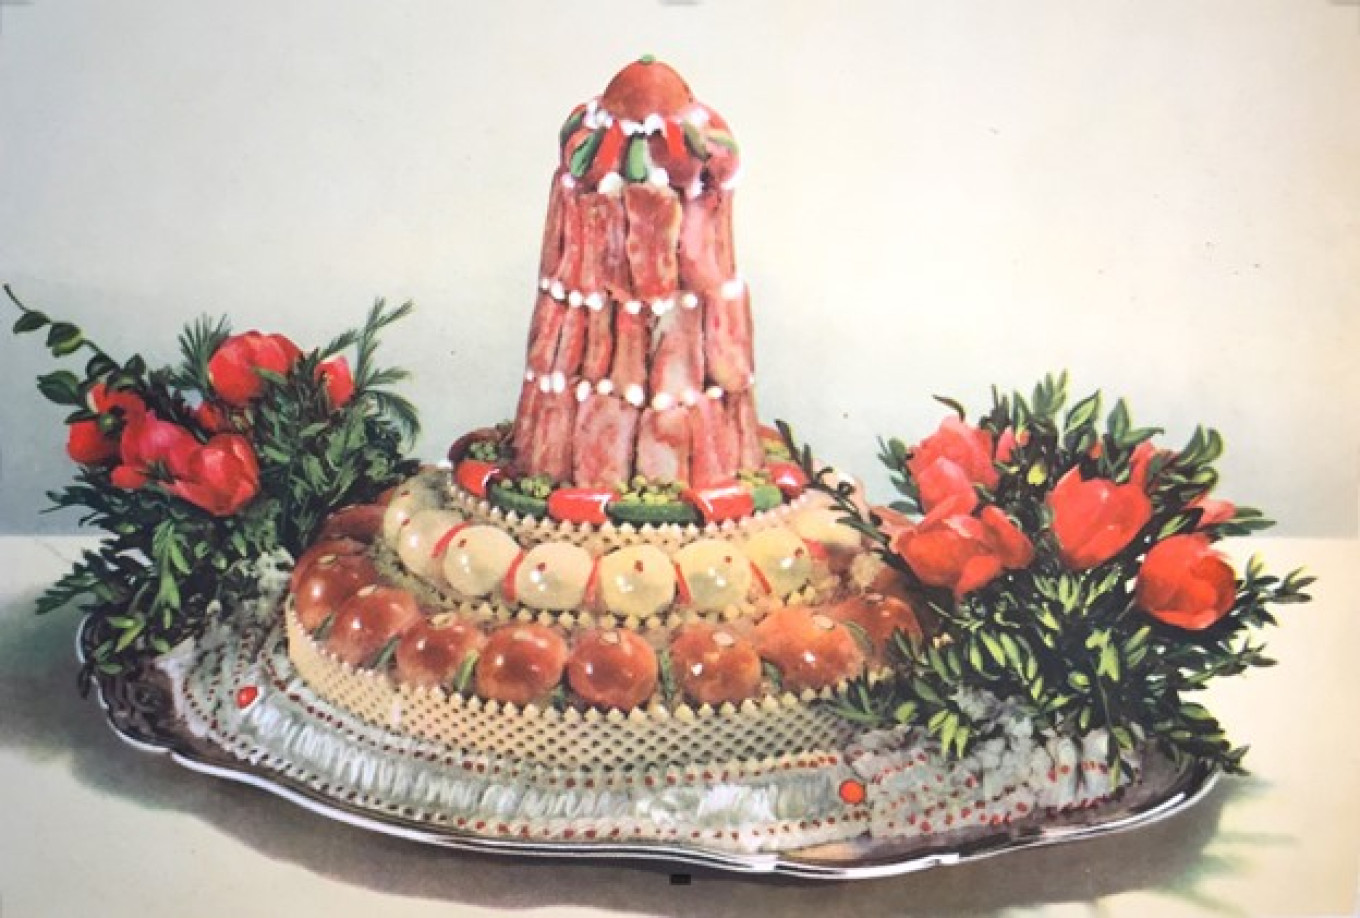 Jellied crab with fish cream puffs from the book Kulinaria (1955).